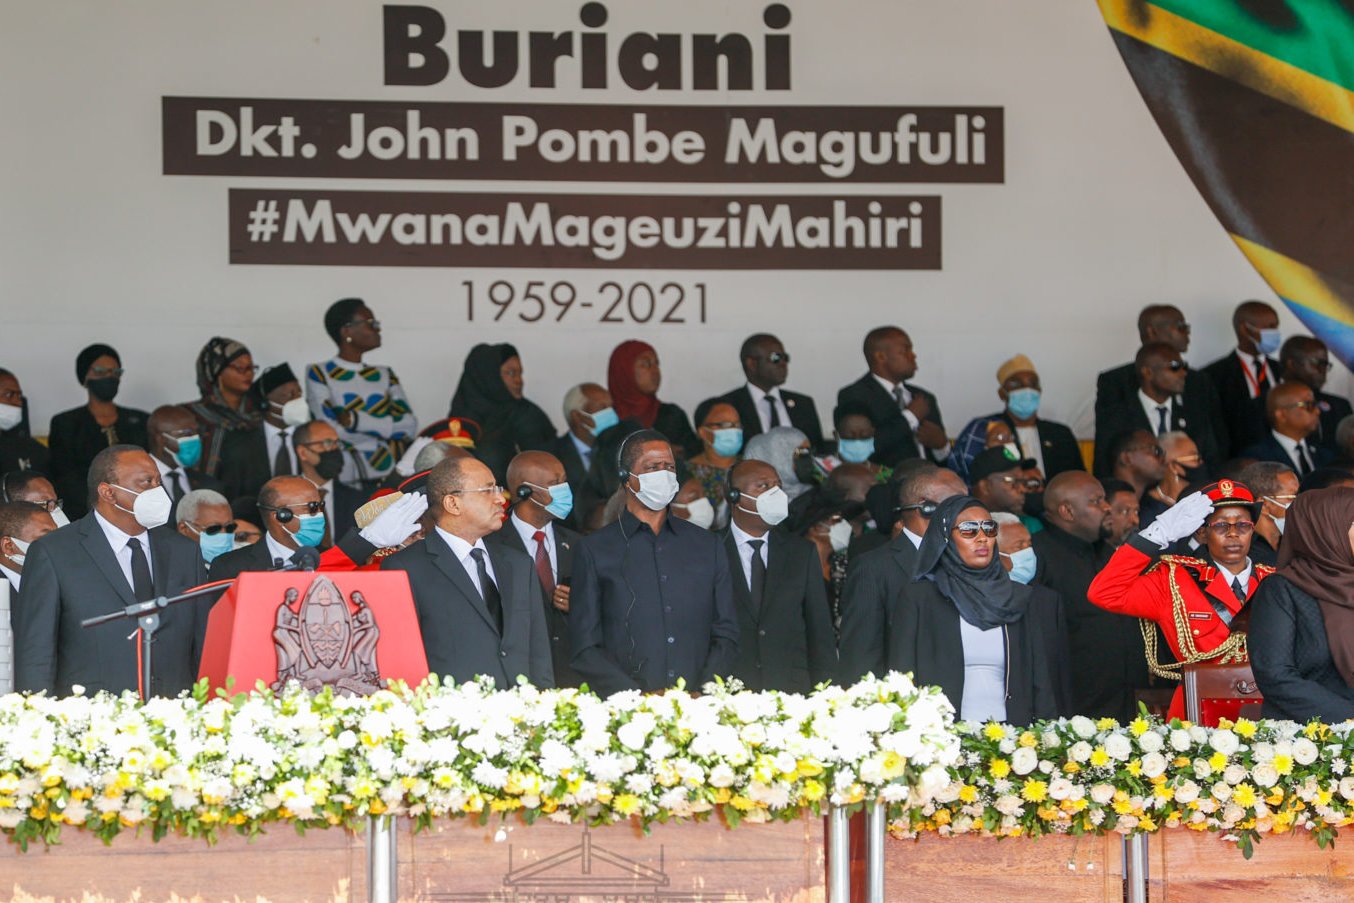 Ngirente represented Kagame at the state funeral in honour of the fallen Tanzanian leader Dr John Pombe Magufuli. The event, attended by several heads of state and government, was held on Monday, March 22.